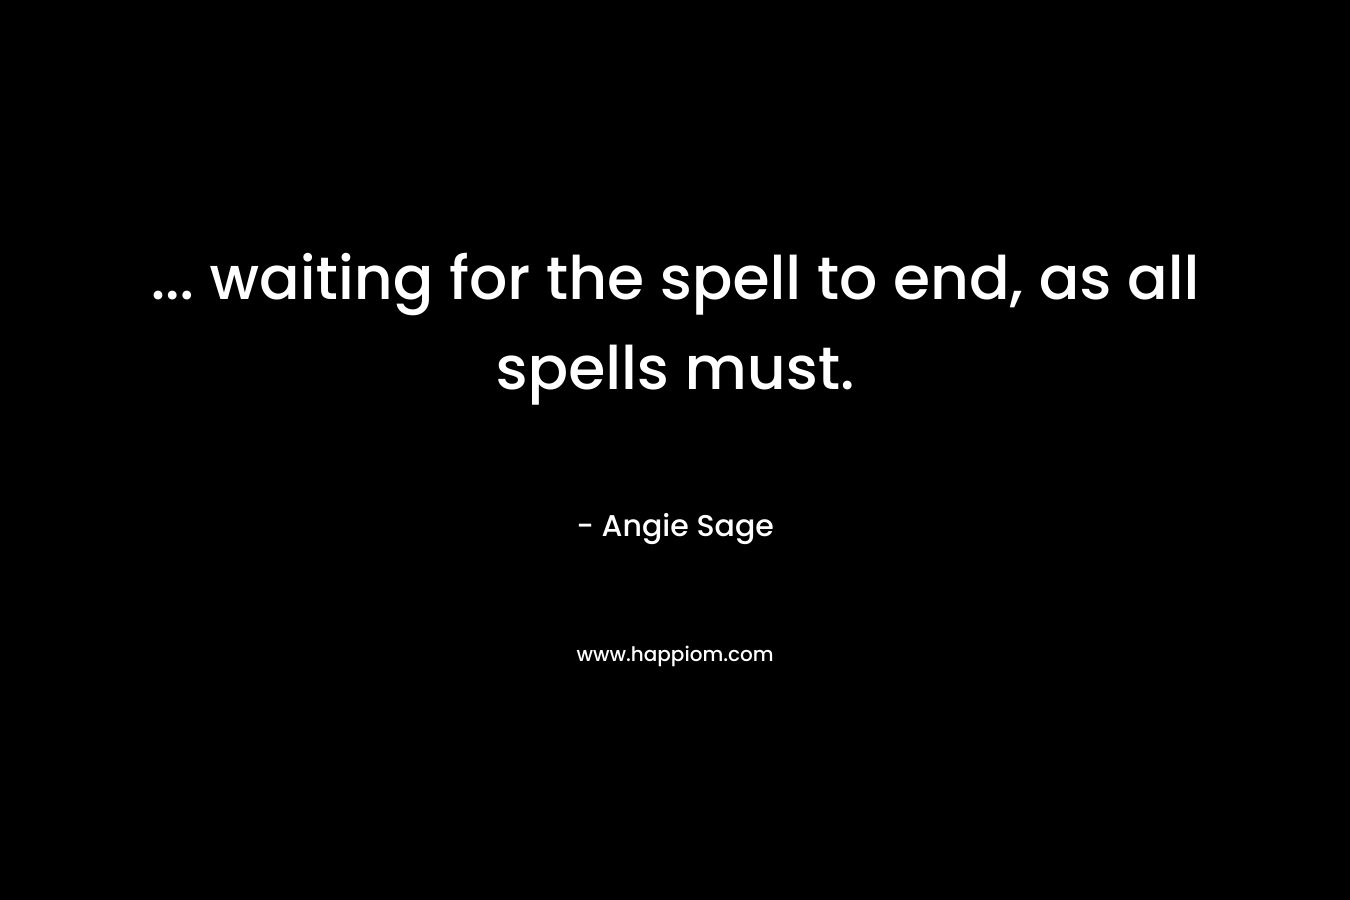 ... waiting for the spell to end, as all spells must.